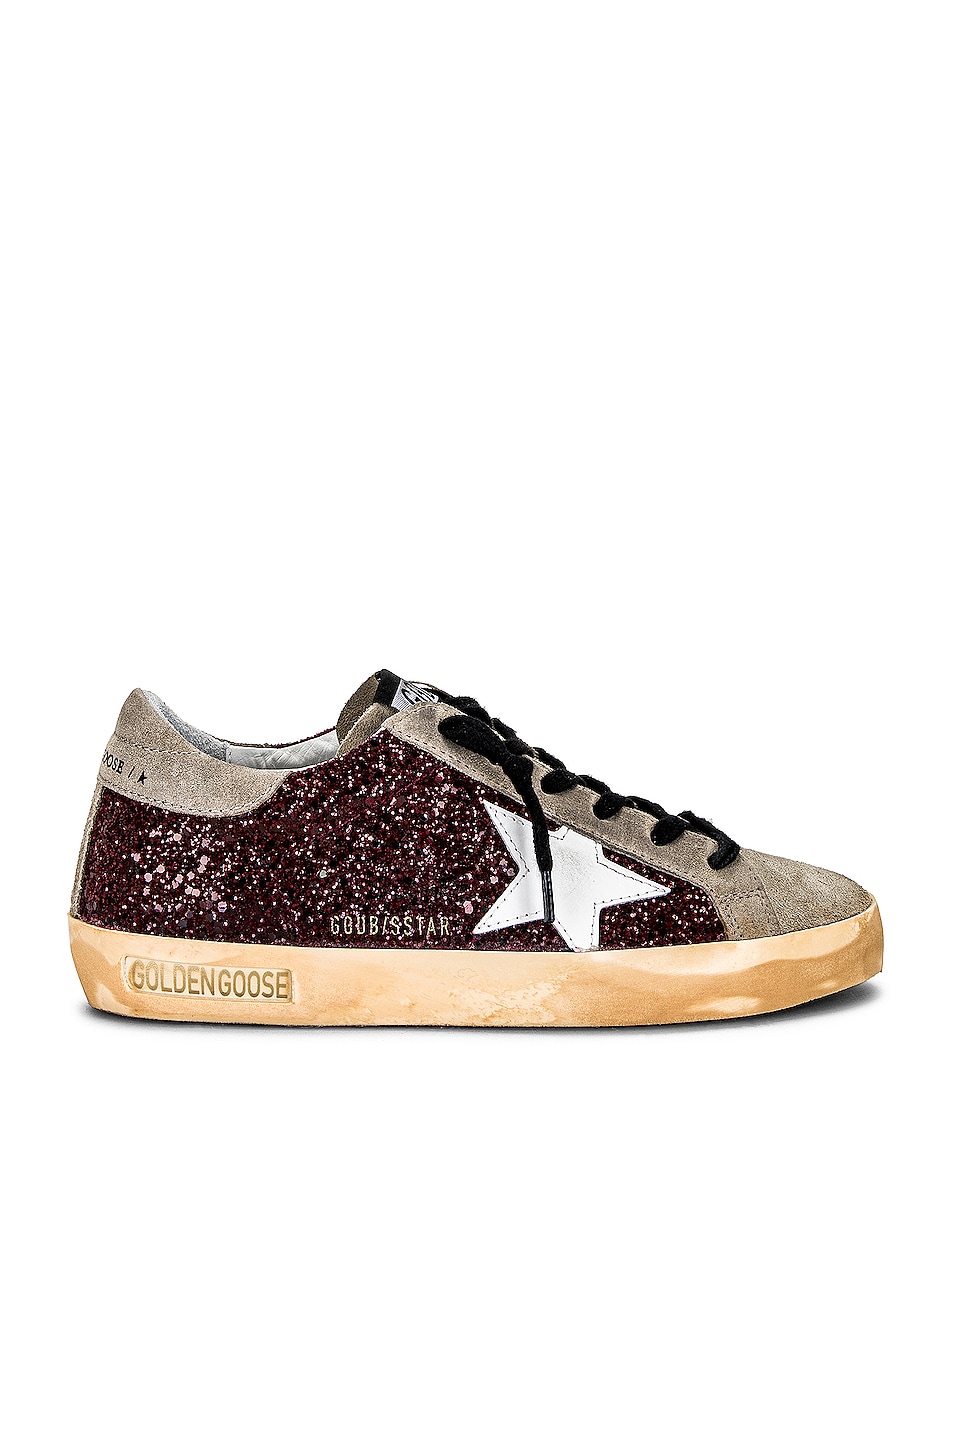 Image 1 of Golden Goose Superstar Sneaker in Bordeaux, Taupe, & White